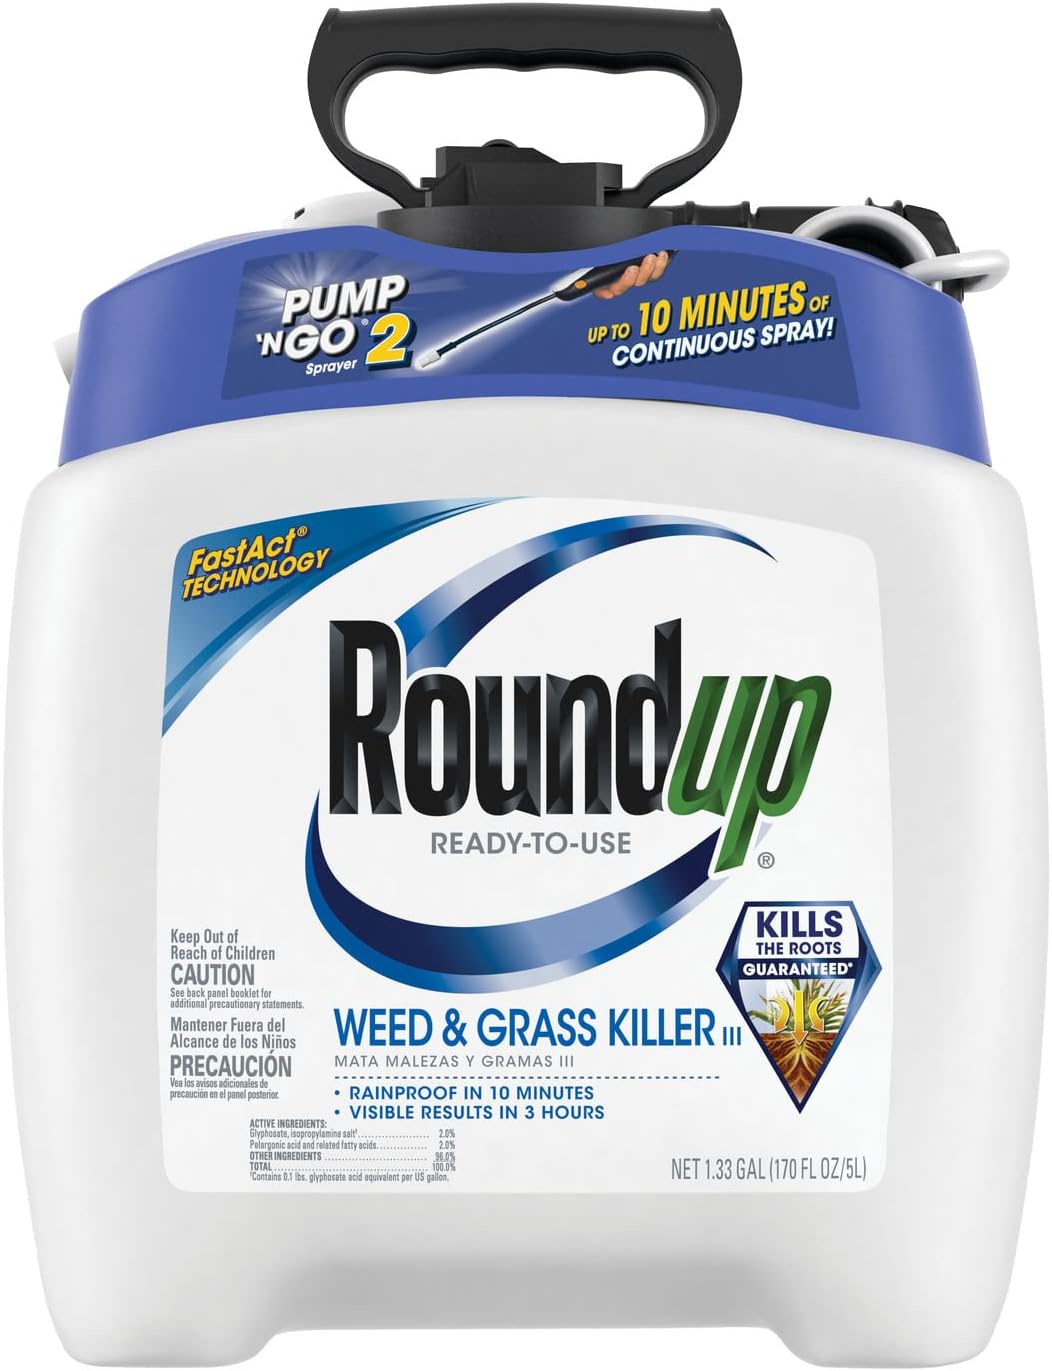 Roundup Ready-To-Use Weed & Grass Killer III -- with [...]